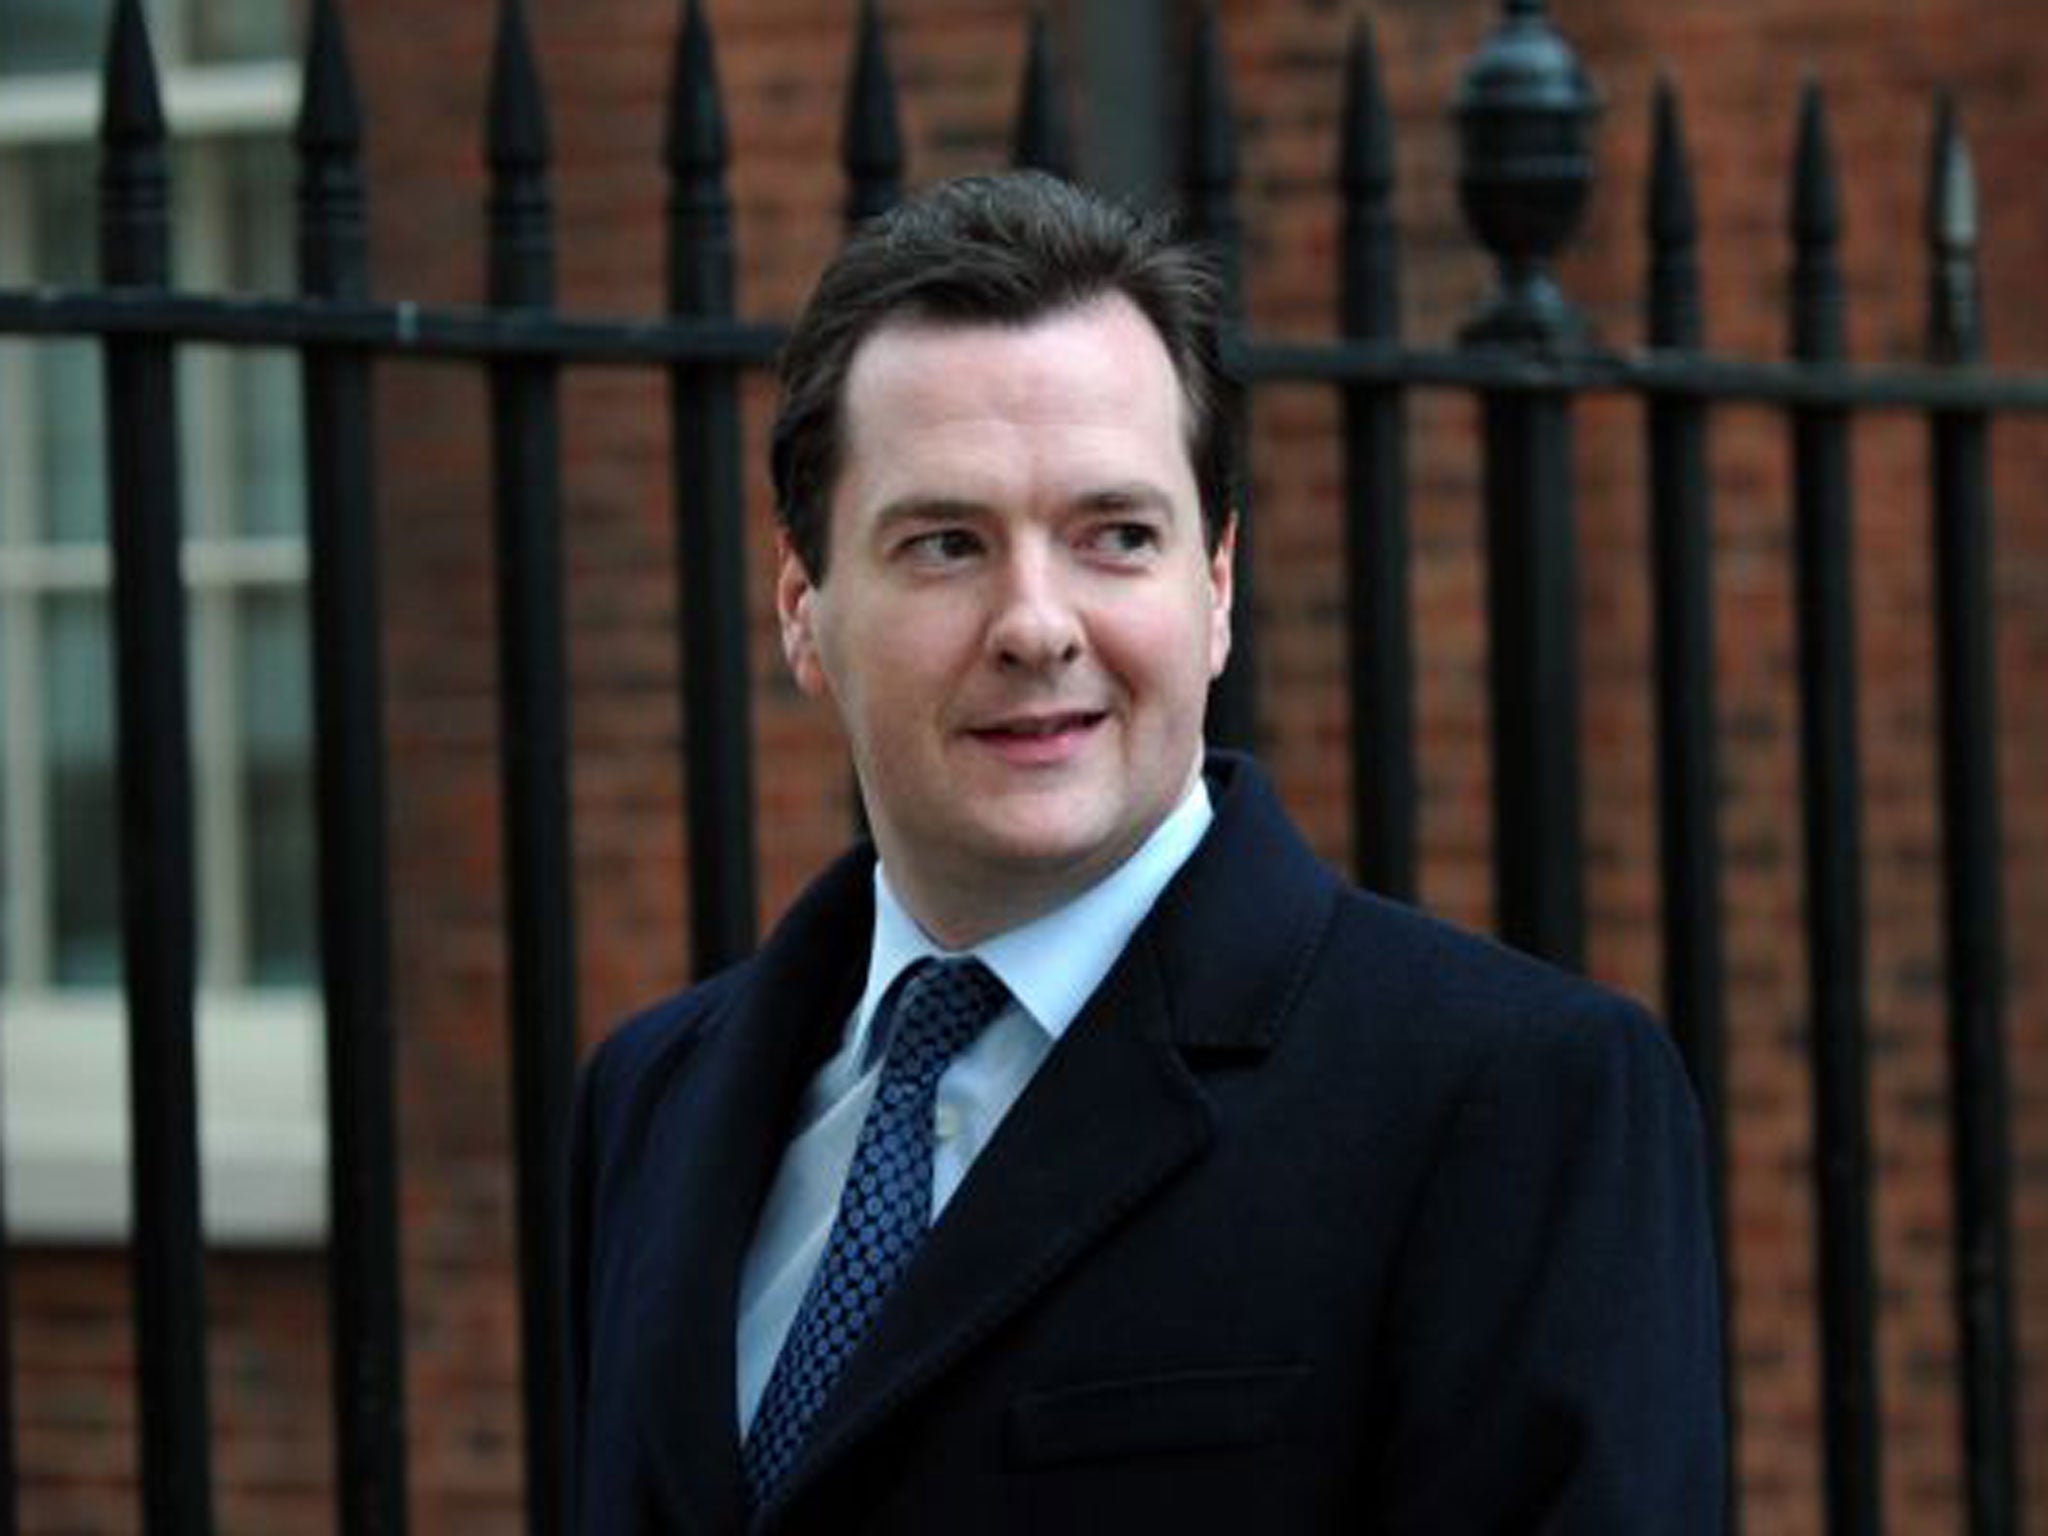 The Chancellor wants to help poorer families cope with the cost of living